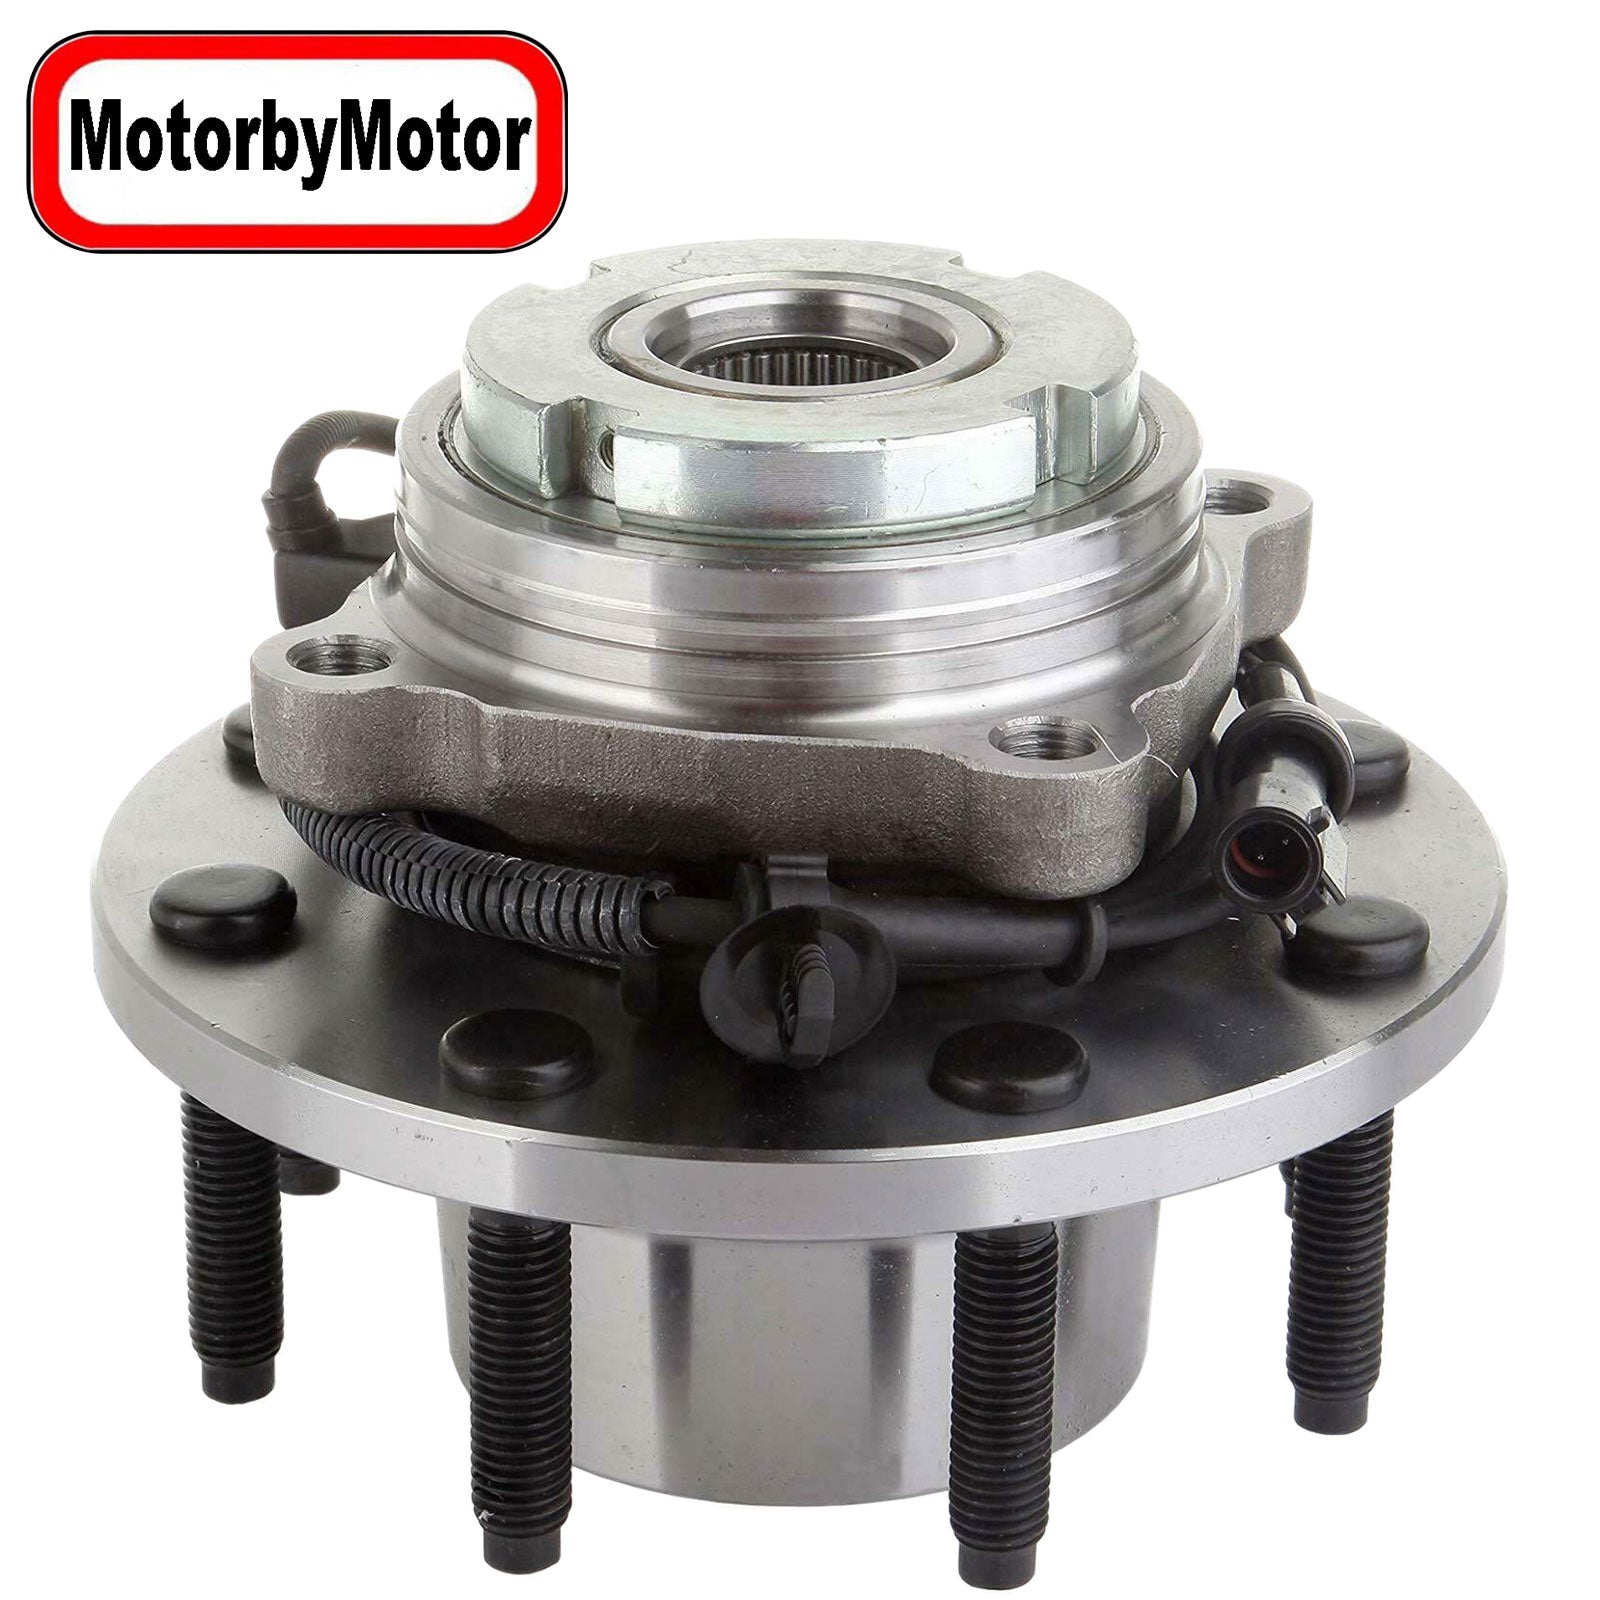 MotorbyMotor 515020 (4WD) Front Heavy Duty Wheel Bearing Assembly with 8 Lugs Fits for Ford F-250 F-350 Super Duty Excursion Wheel Bearing and Hub Assembly (W/ABS, SRW)-Single Rear Wheels ONLY MotorbyMotor